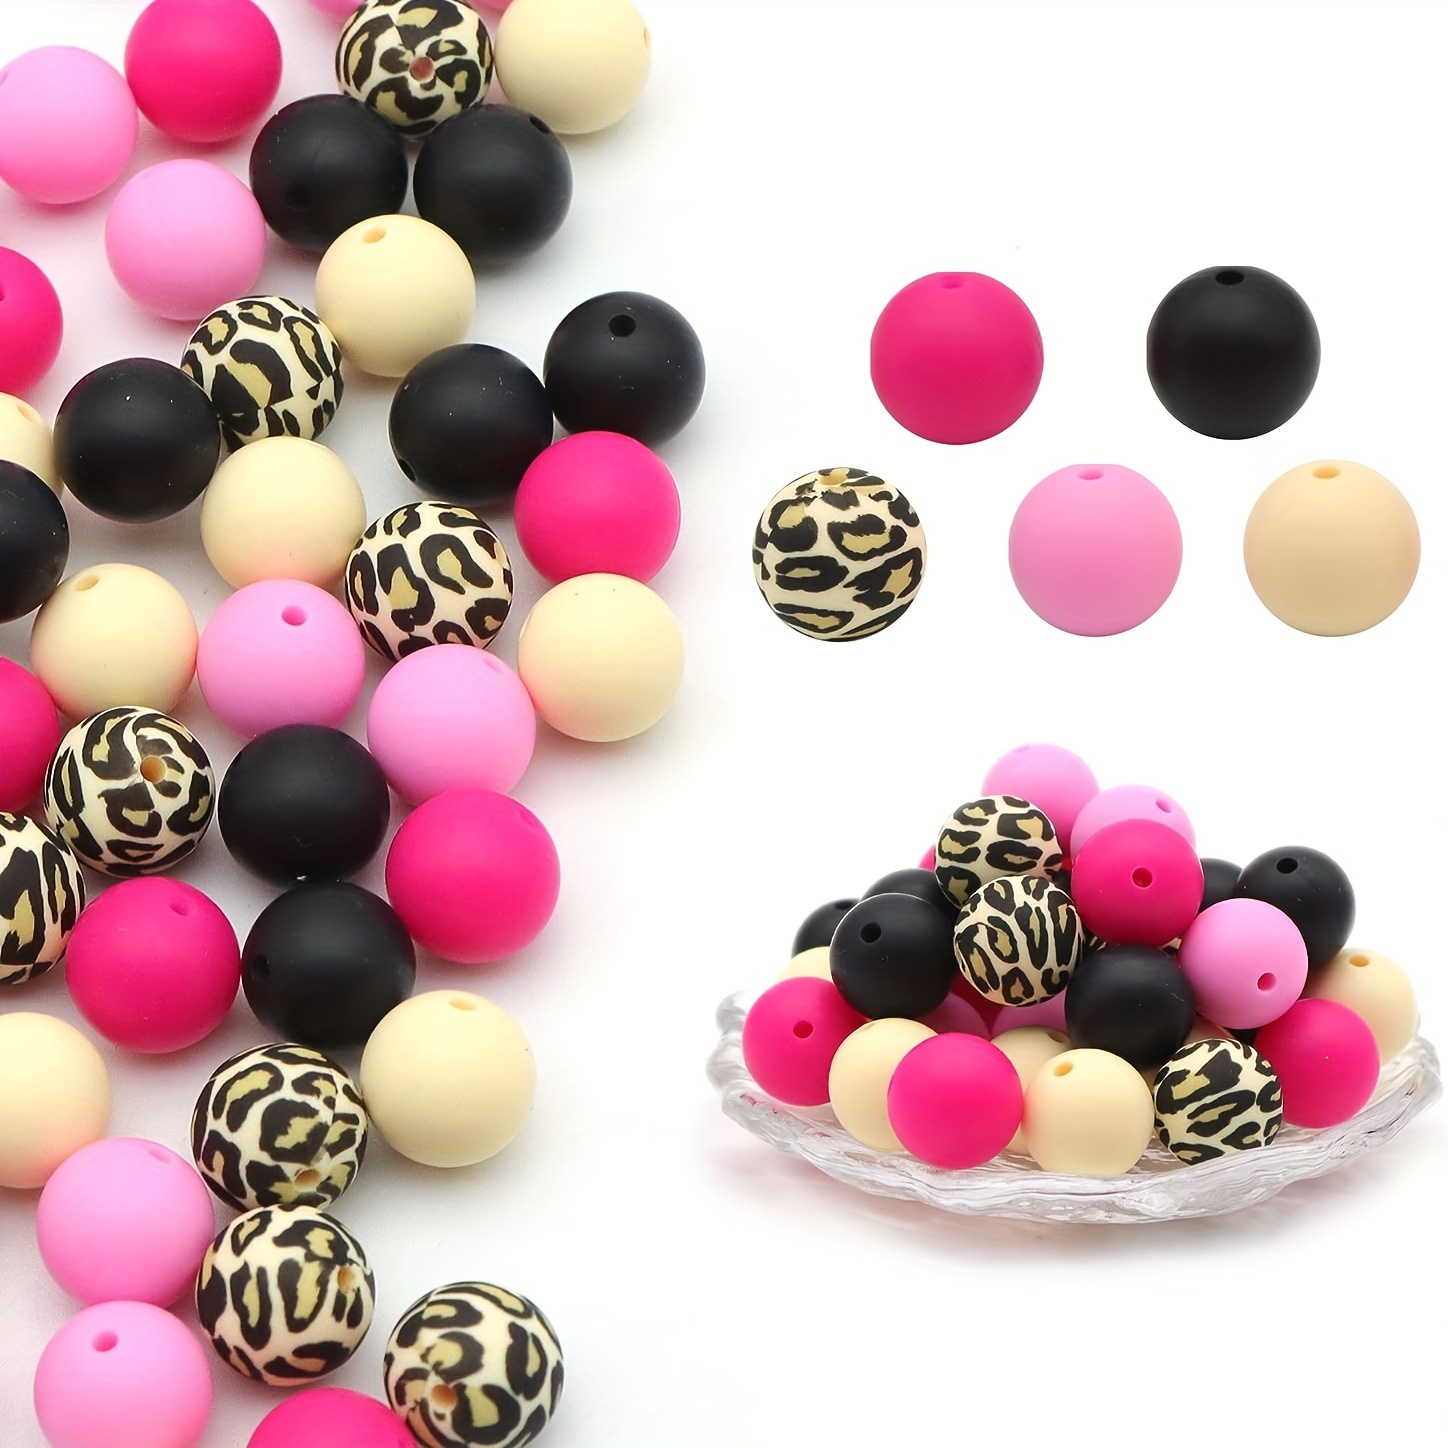 Spiky Silicone Beads, Pink/white Beads Silicone Beads, Spiky Beads, Fun  Beads, Jewelry Making, Jewelry Supply, Crafts, Beads, Crafting, DIY 